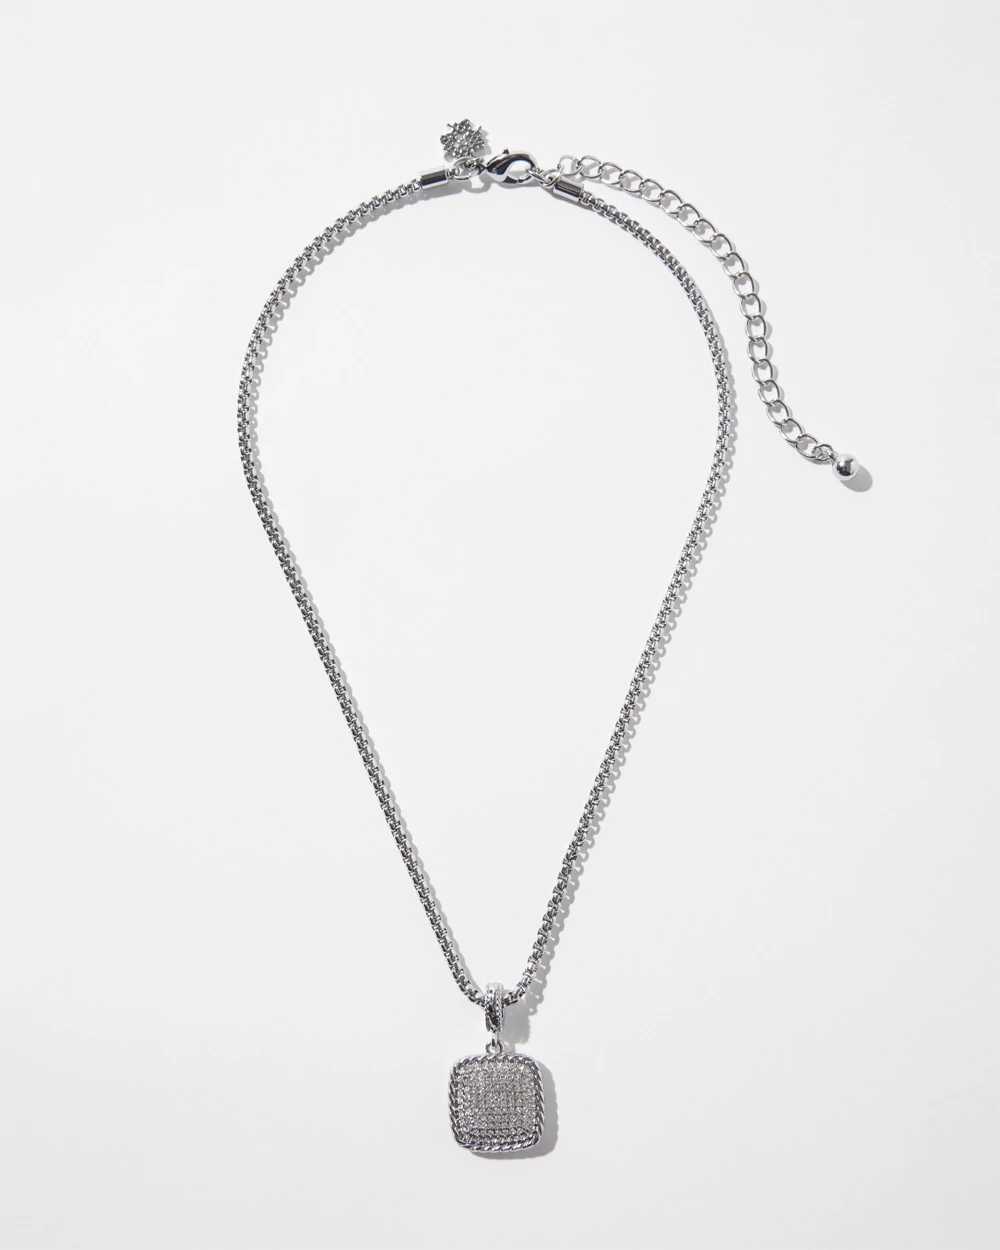 Silver Pave Square Pendant Necklace click to view larger image.